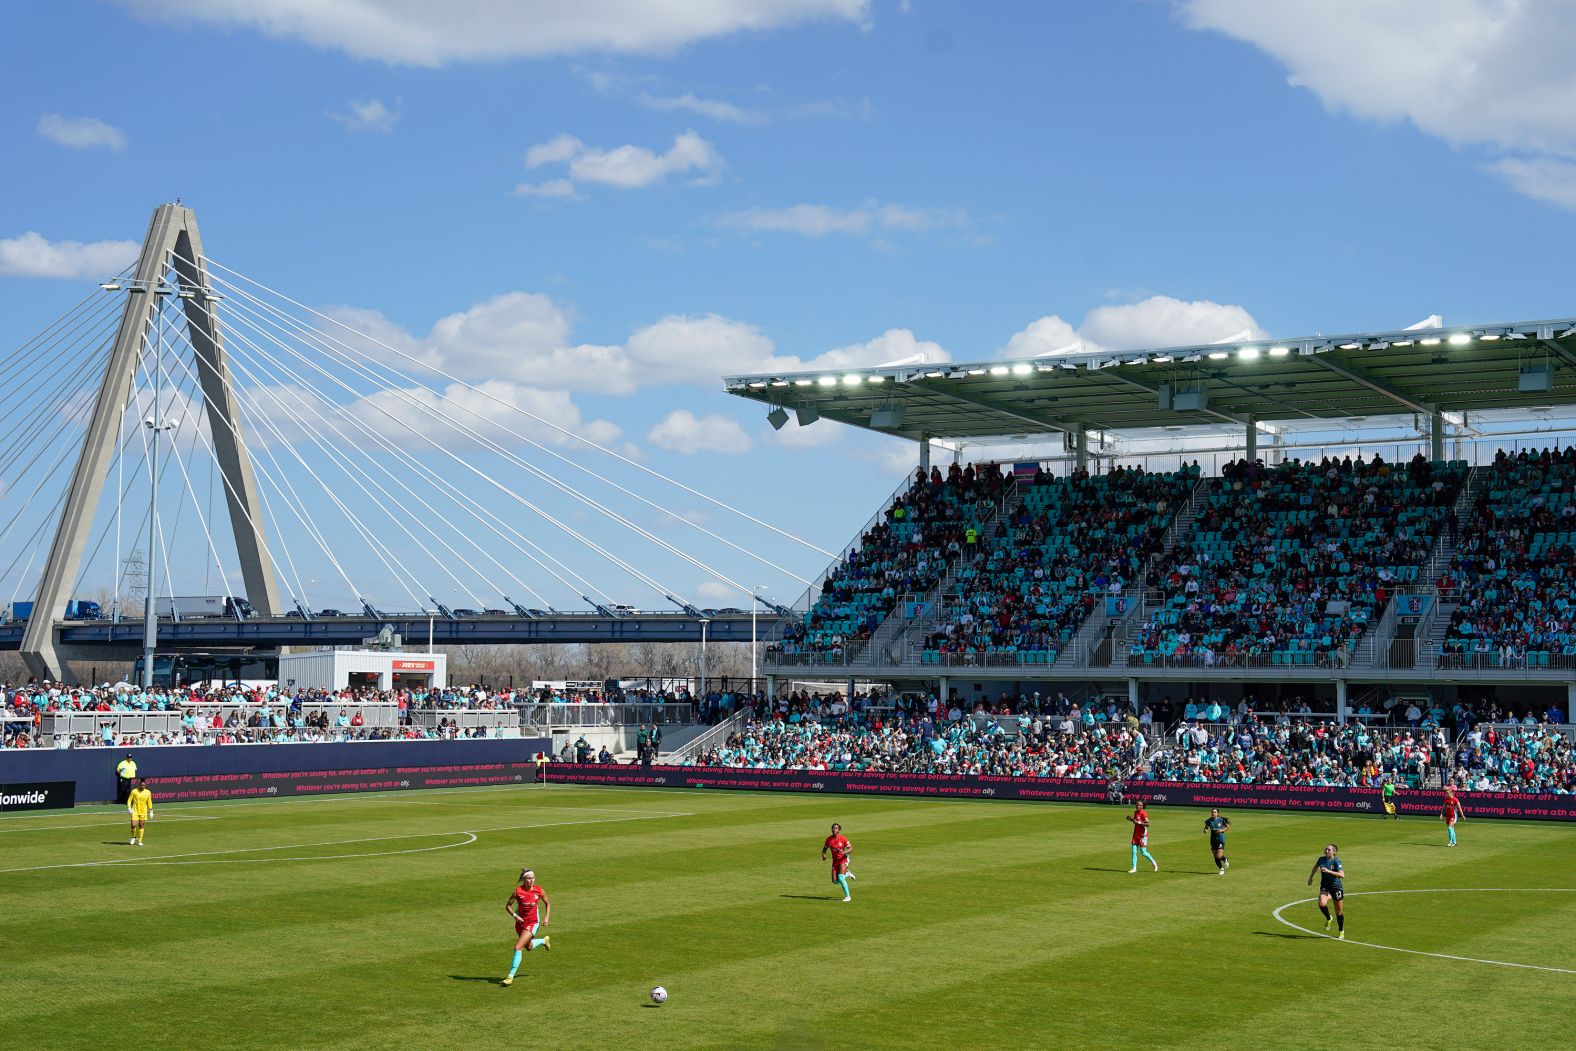 The Kansas City Current take on Portland Thorns FC during their season opener at the newly-built <a href="index.php?page=&url=https%3A%2F%2Fcpkcstadium.com%2Fstadium" target="_blank" target="_blank">CPKC Stadium</a> in Kansas City, Missouri, on Saturday, March 16. The team touts the venue as "the first stadium purpose-built for a women's professional team in the world."